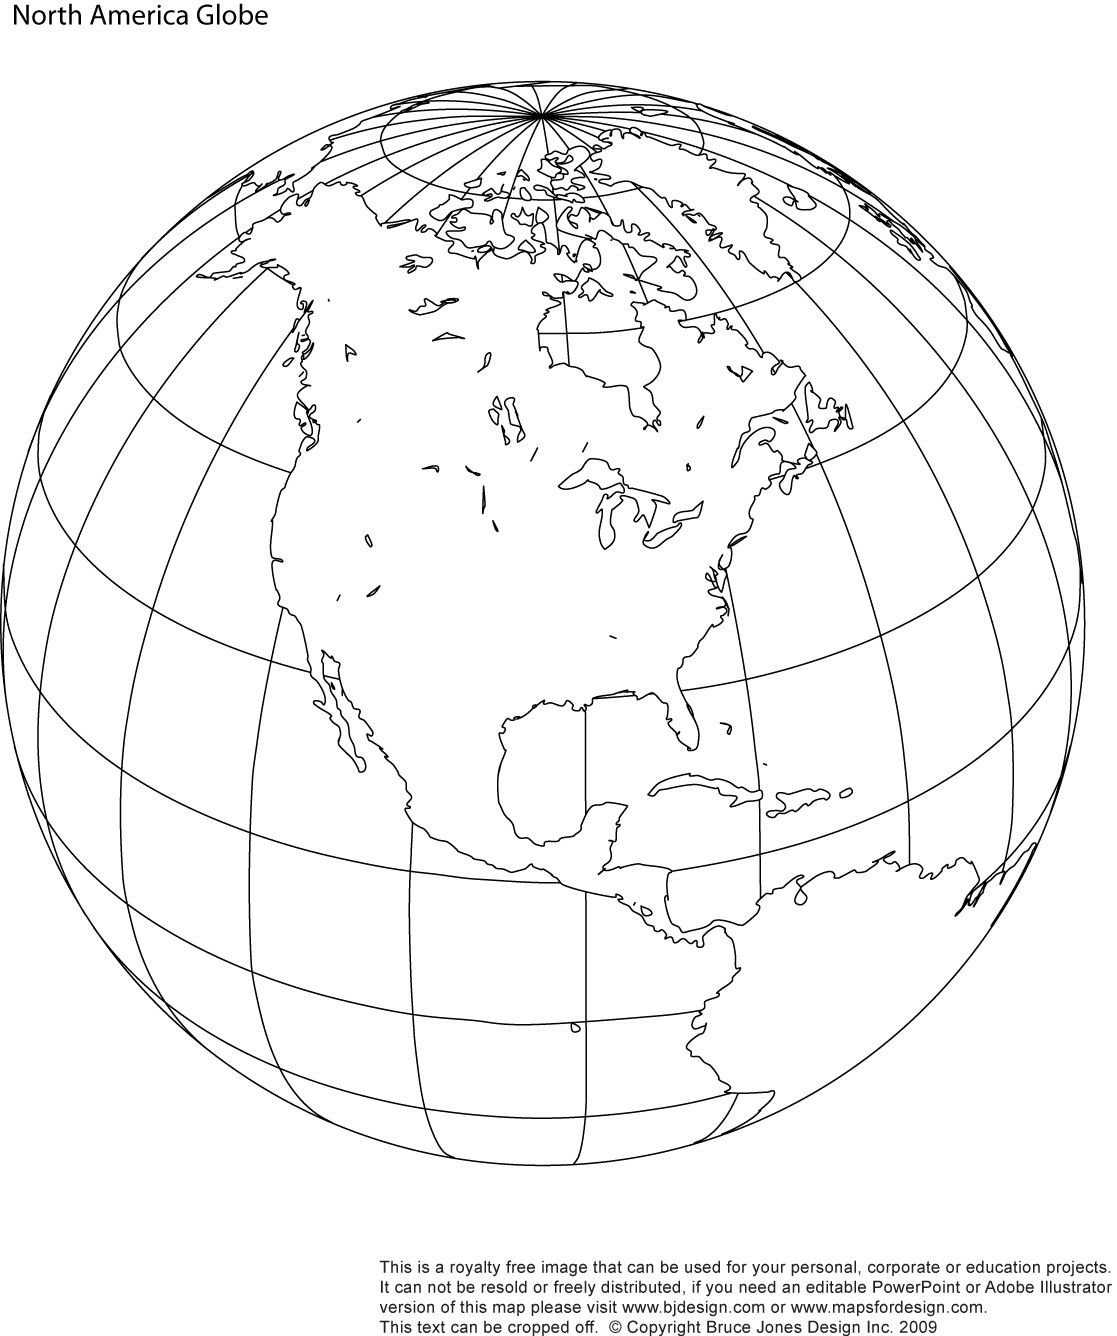 North America printable globe perfect for a school or